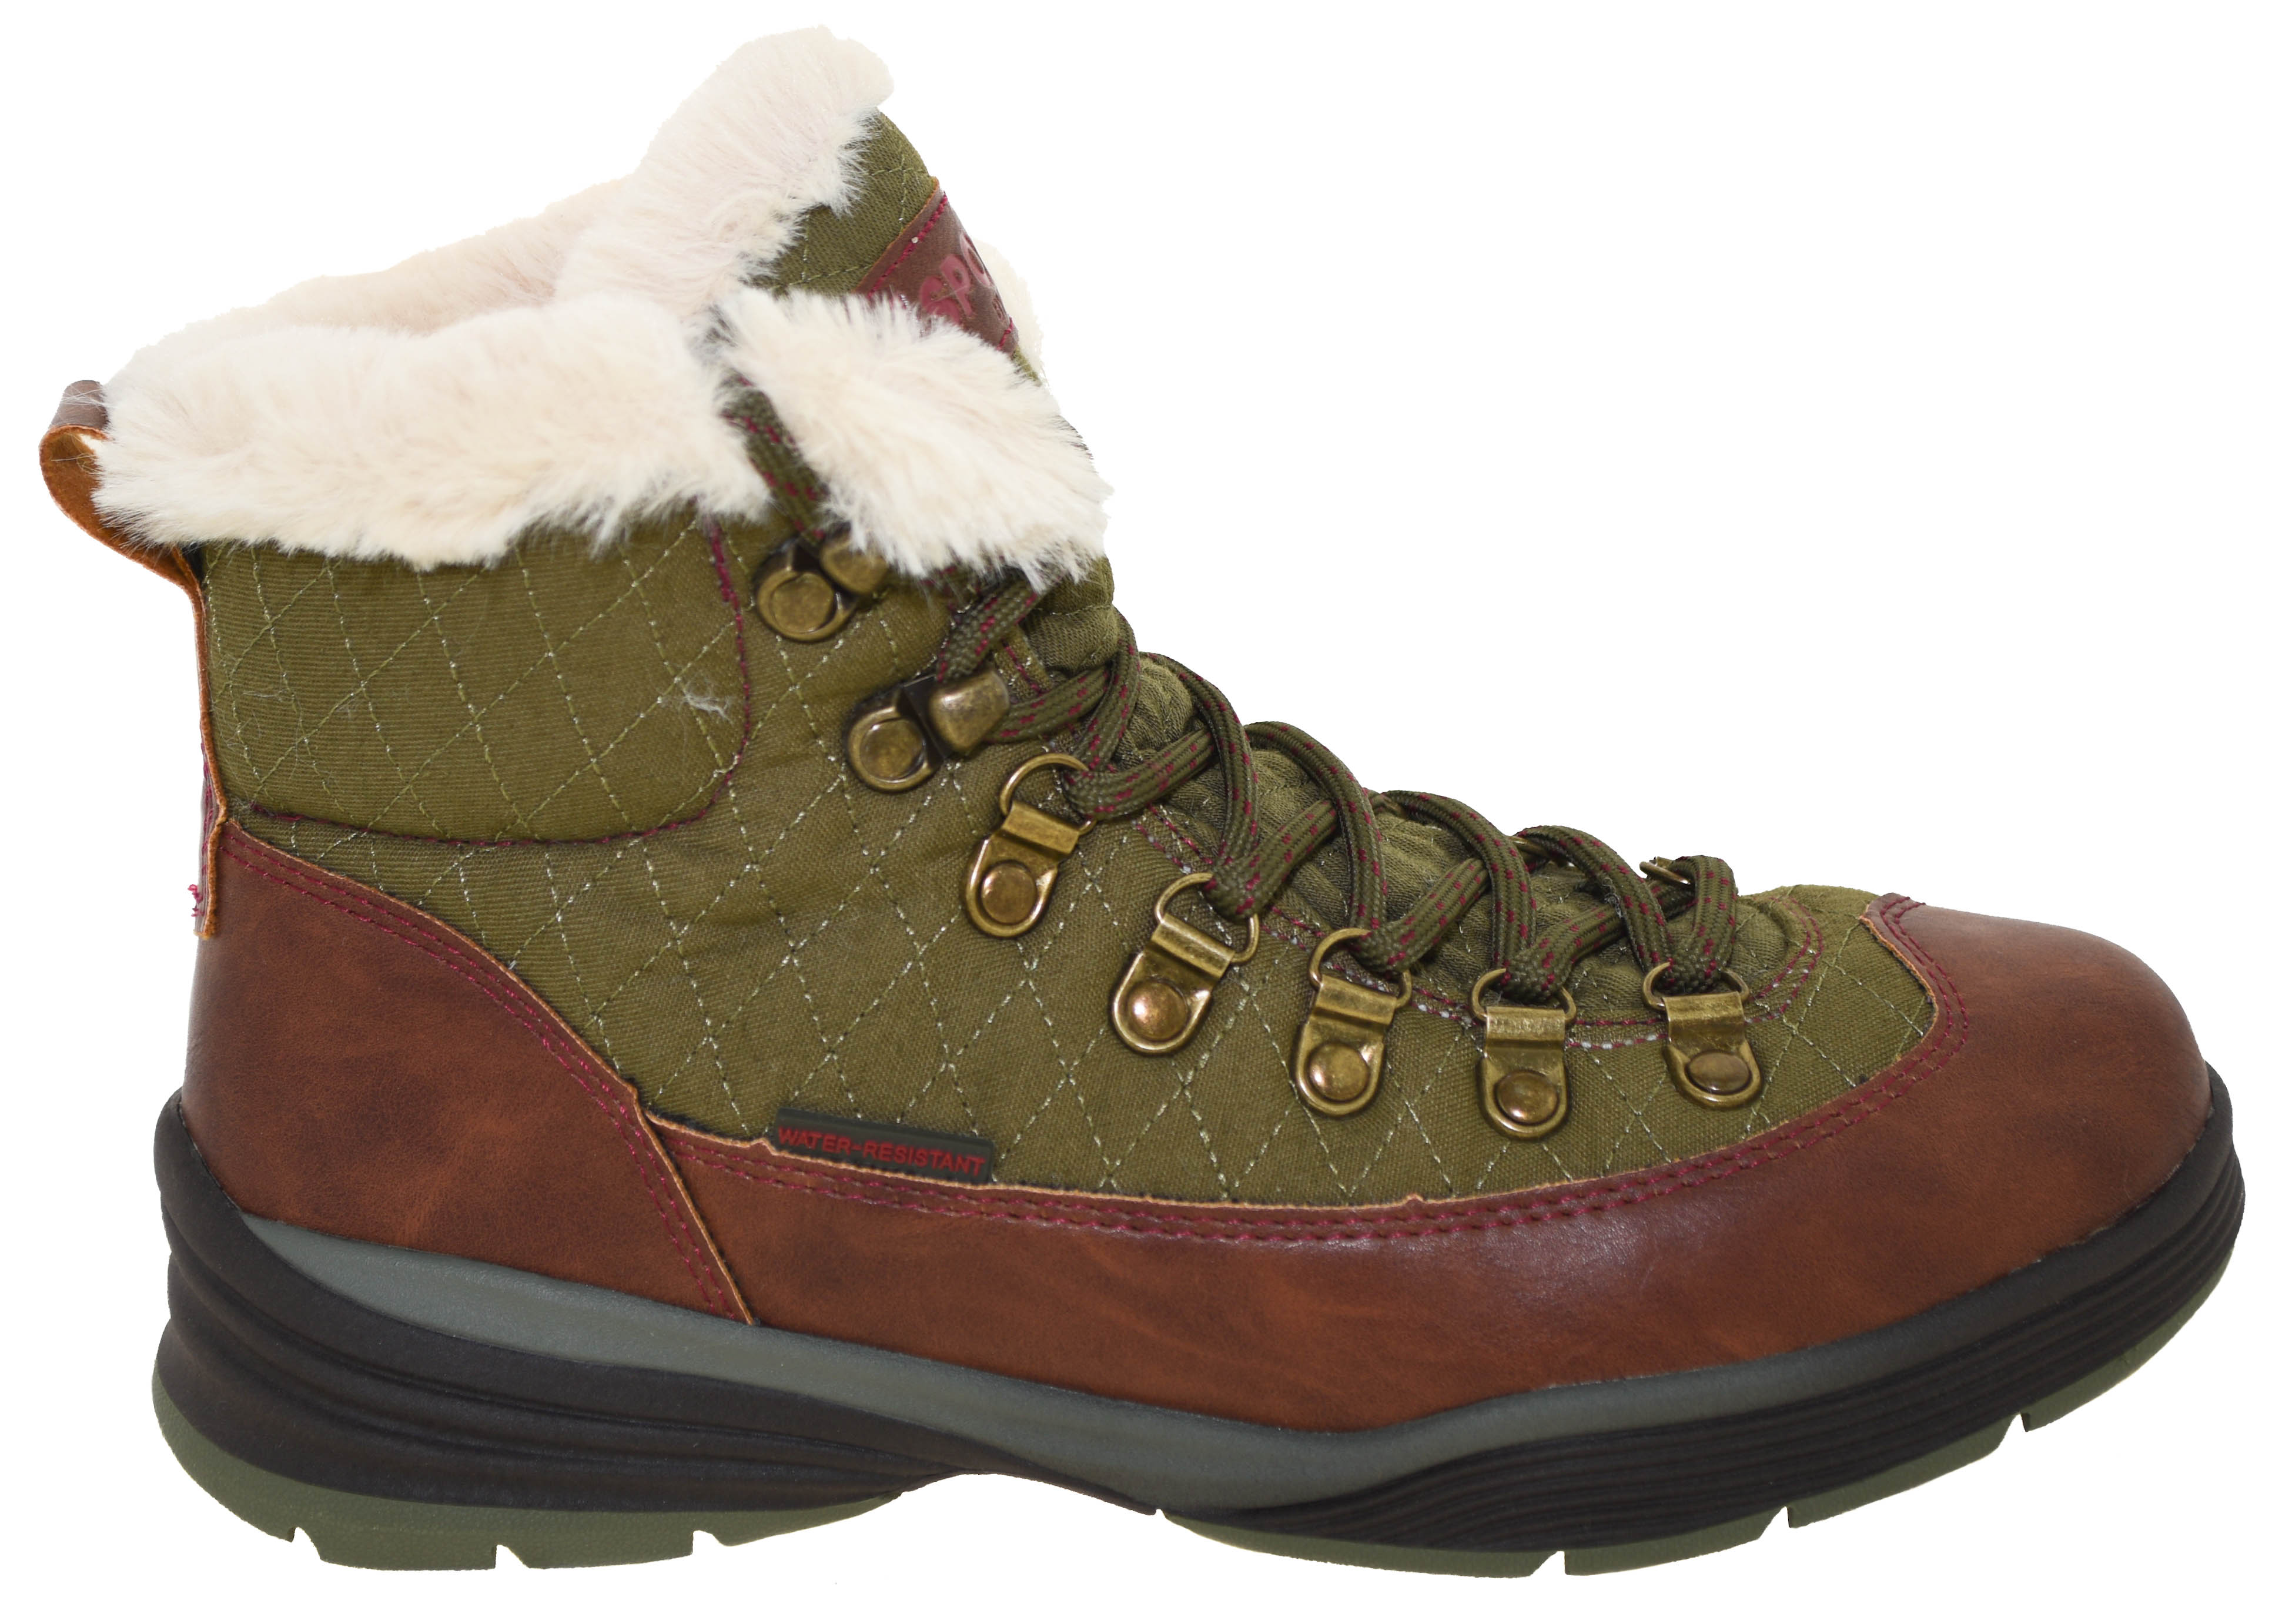 Everest Winter Boots Army | eBay